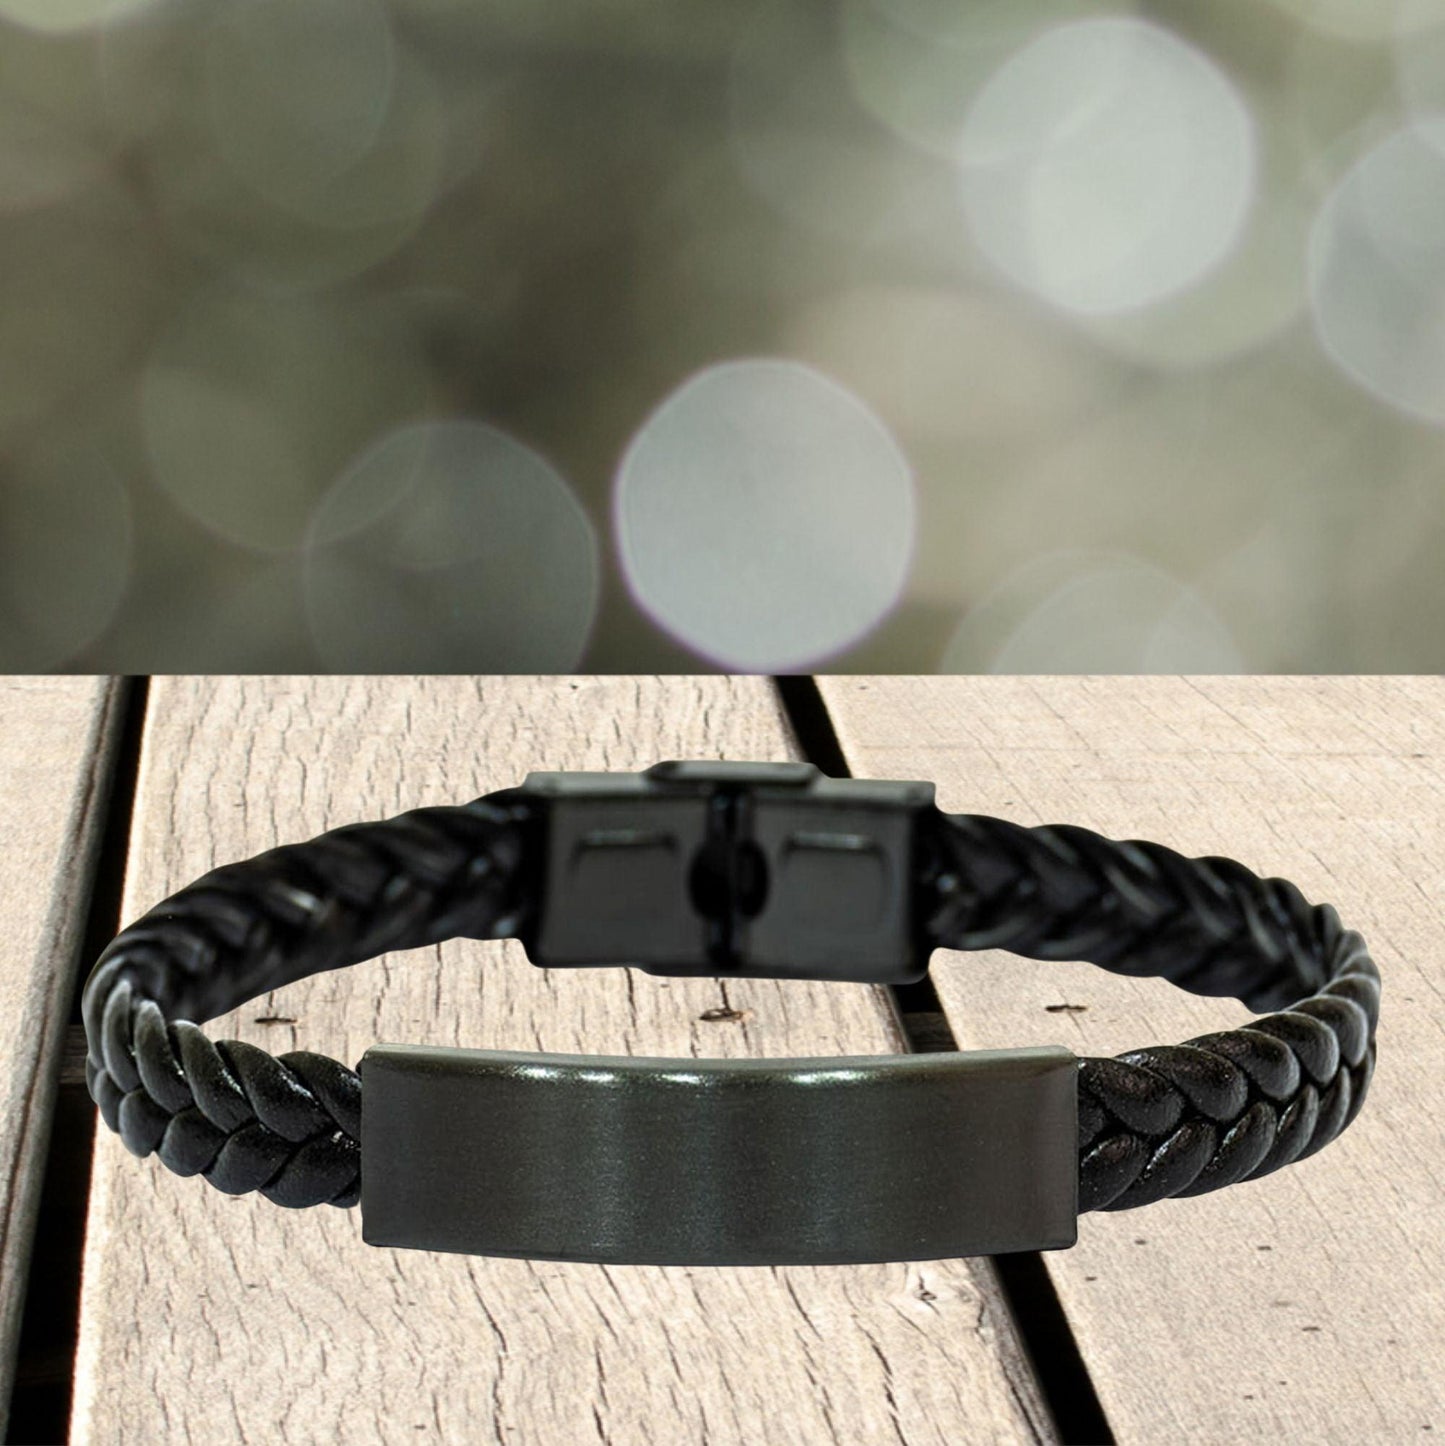 Brother Gifts, To My Brother Remember, you will never lose. You will either WIN or LEARN, Keepsake Braided Leather Bracelet For Brother Engraved, Birthday Christmas Gifts Ideas For Brother X-mas Gifts - Mallard Moon Gift Shop